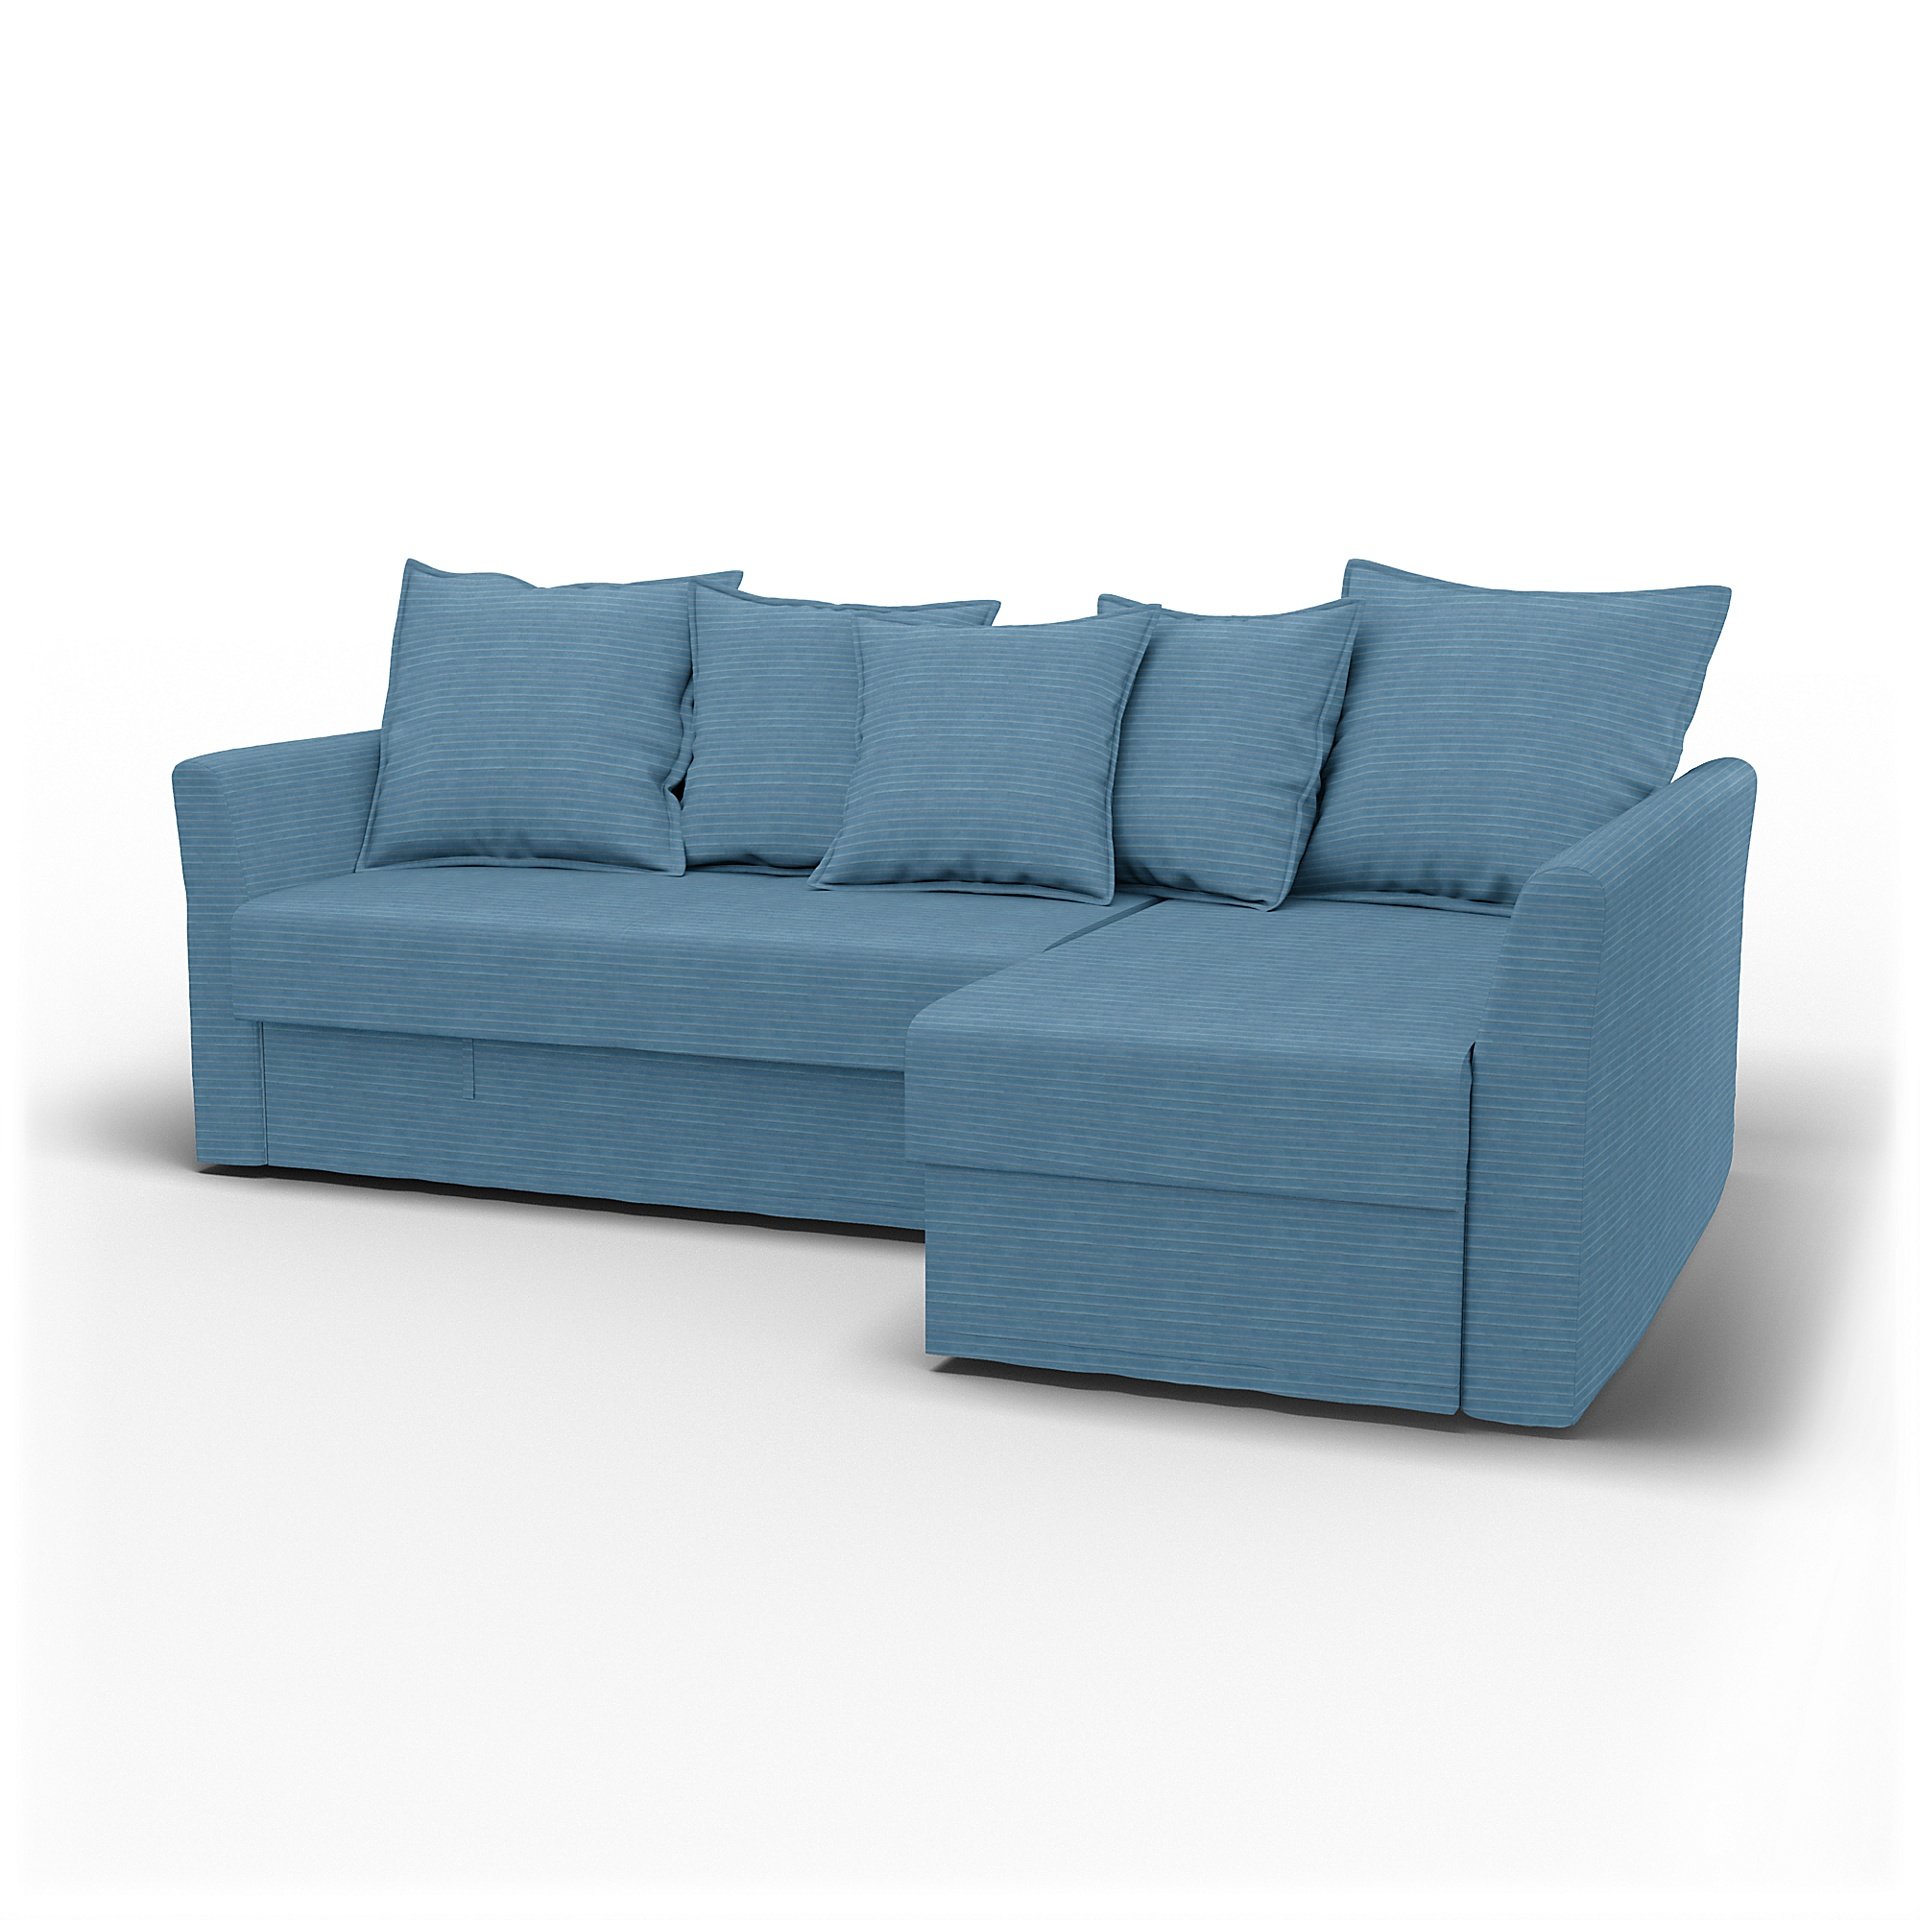 IKEA - Holmsund Sofabed with Chaiselongue, Sky Blue, Corduroy - Bemz